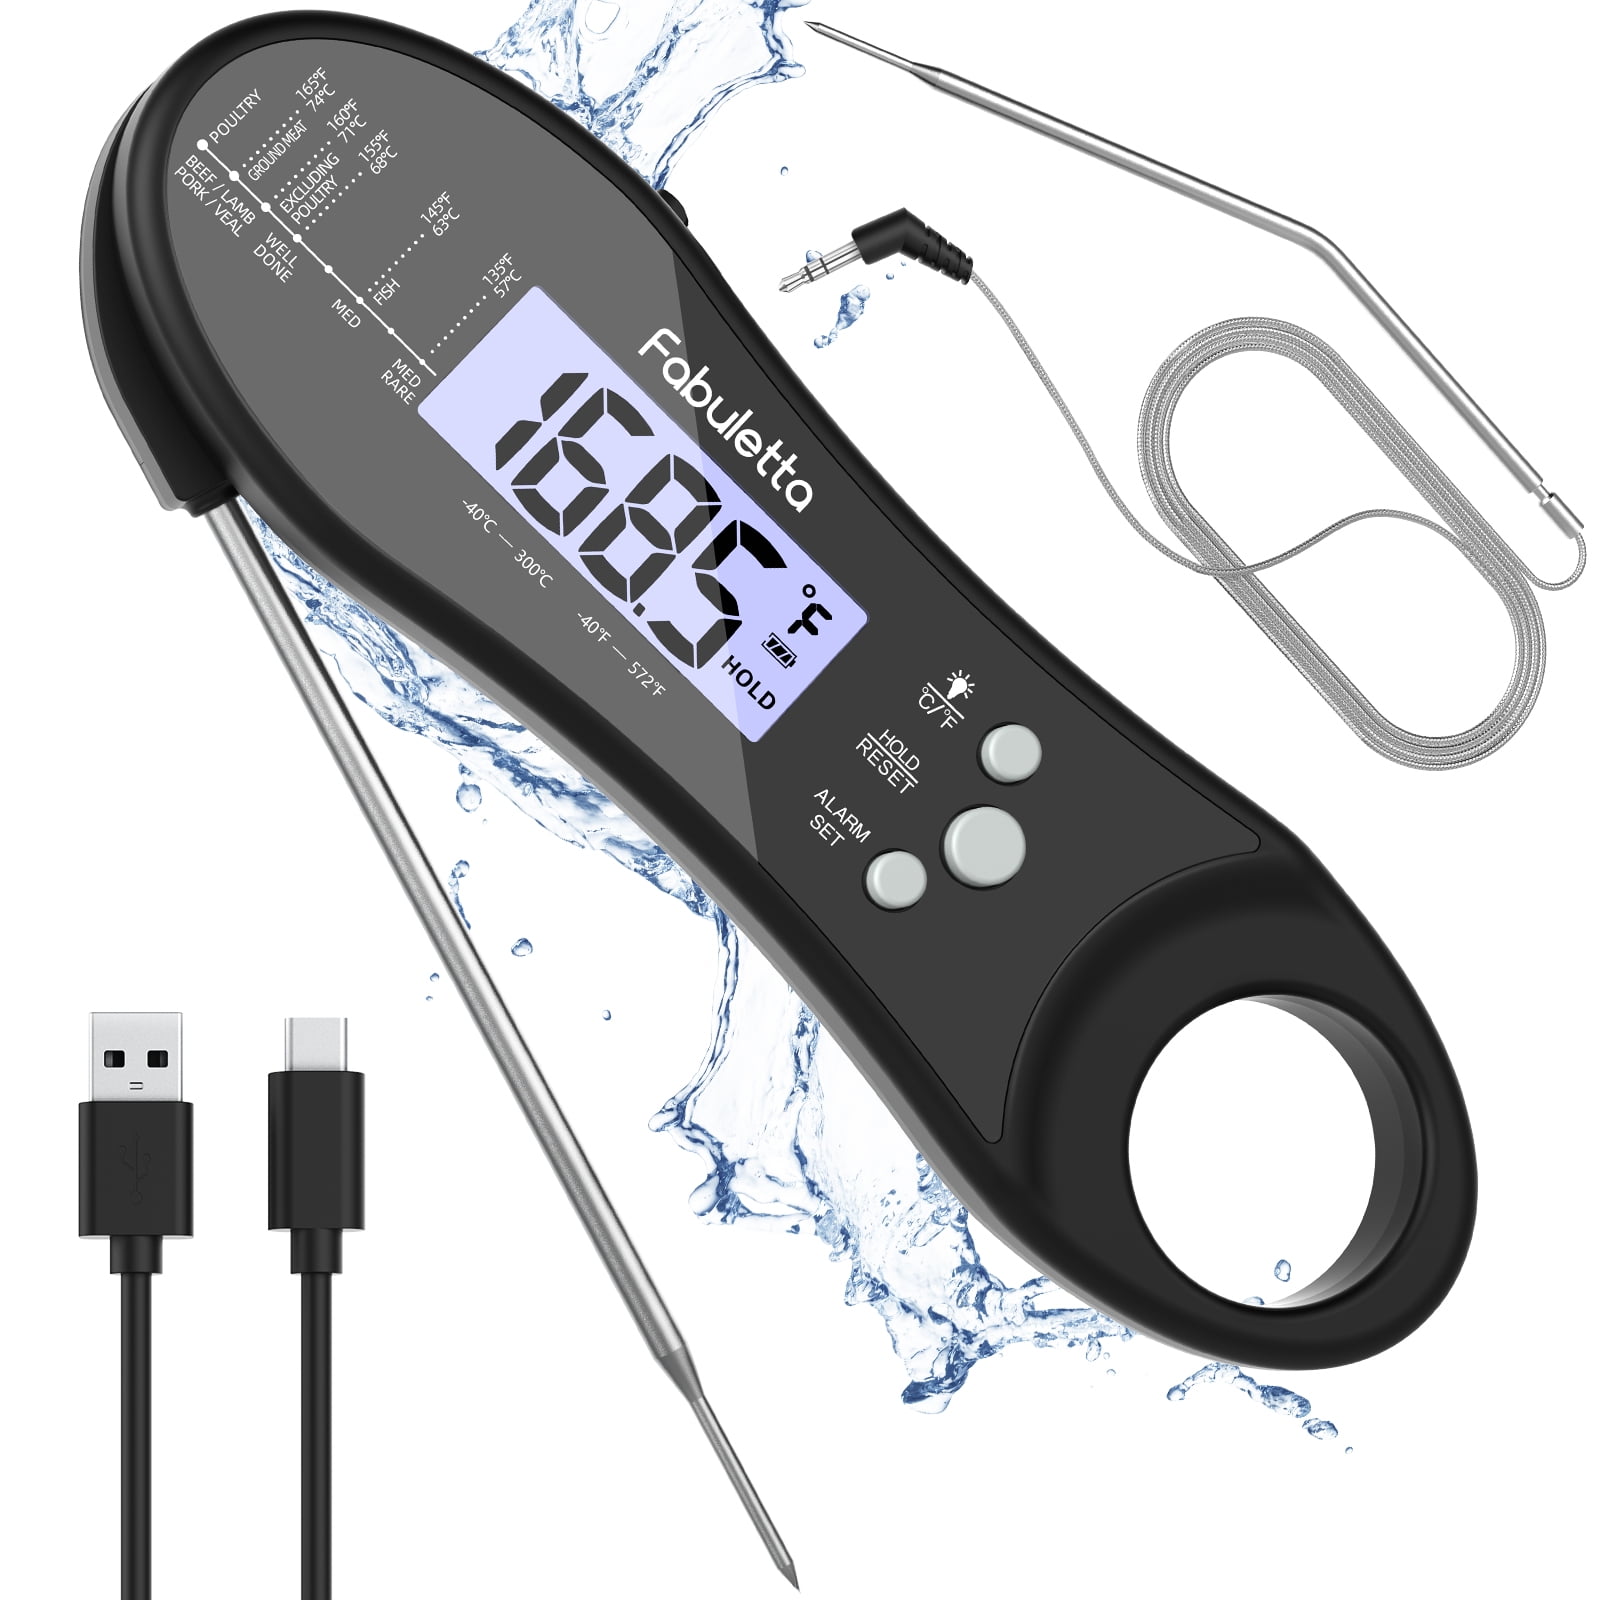 Meat Thermometer, HomLeaFac Dual Probe Digital Instant Read Food Thermometer with Alarm and Calibration Function, Large Backlit Screen Thermometer